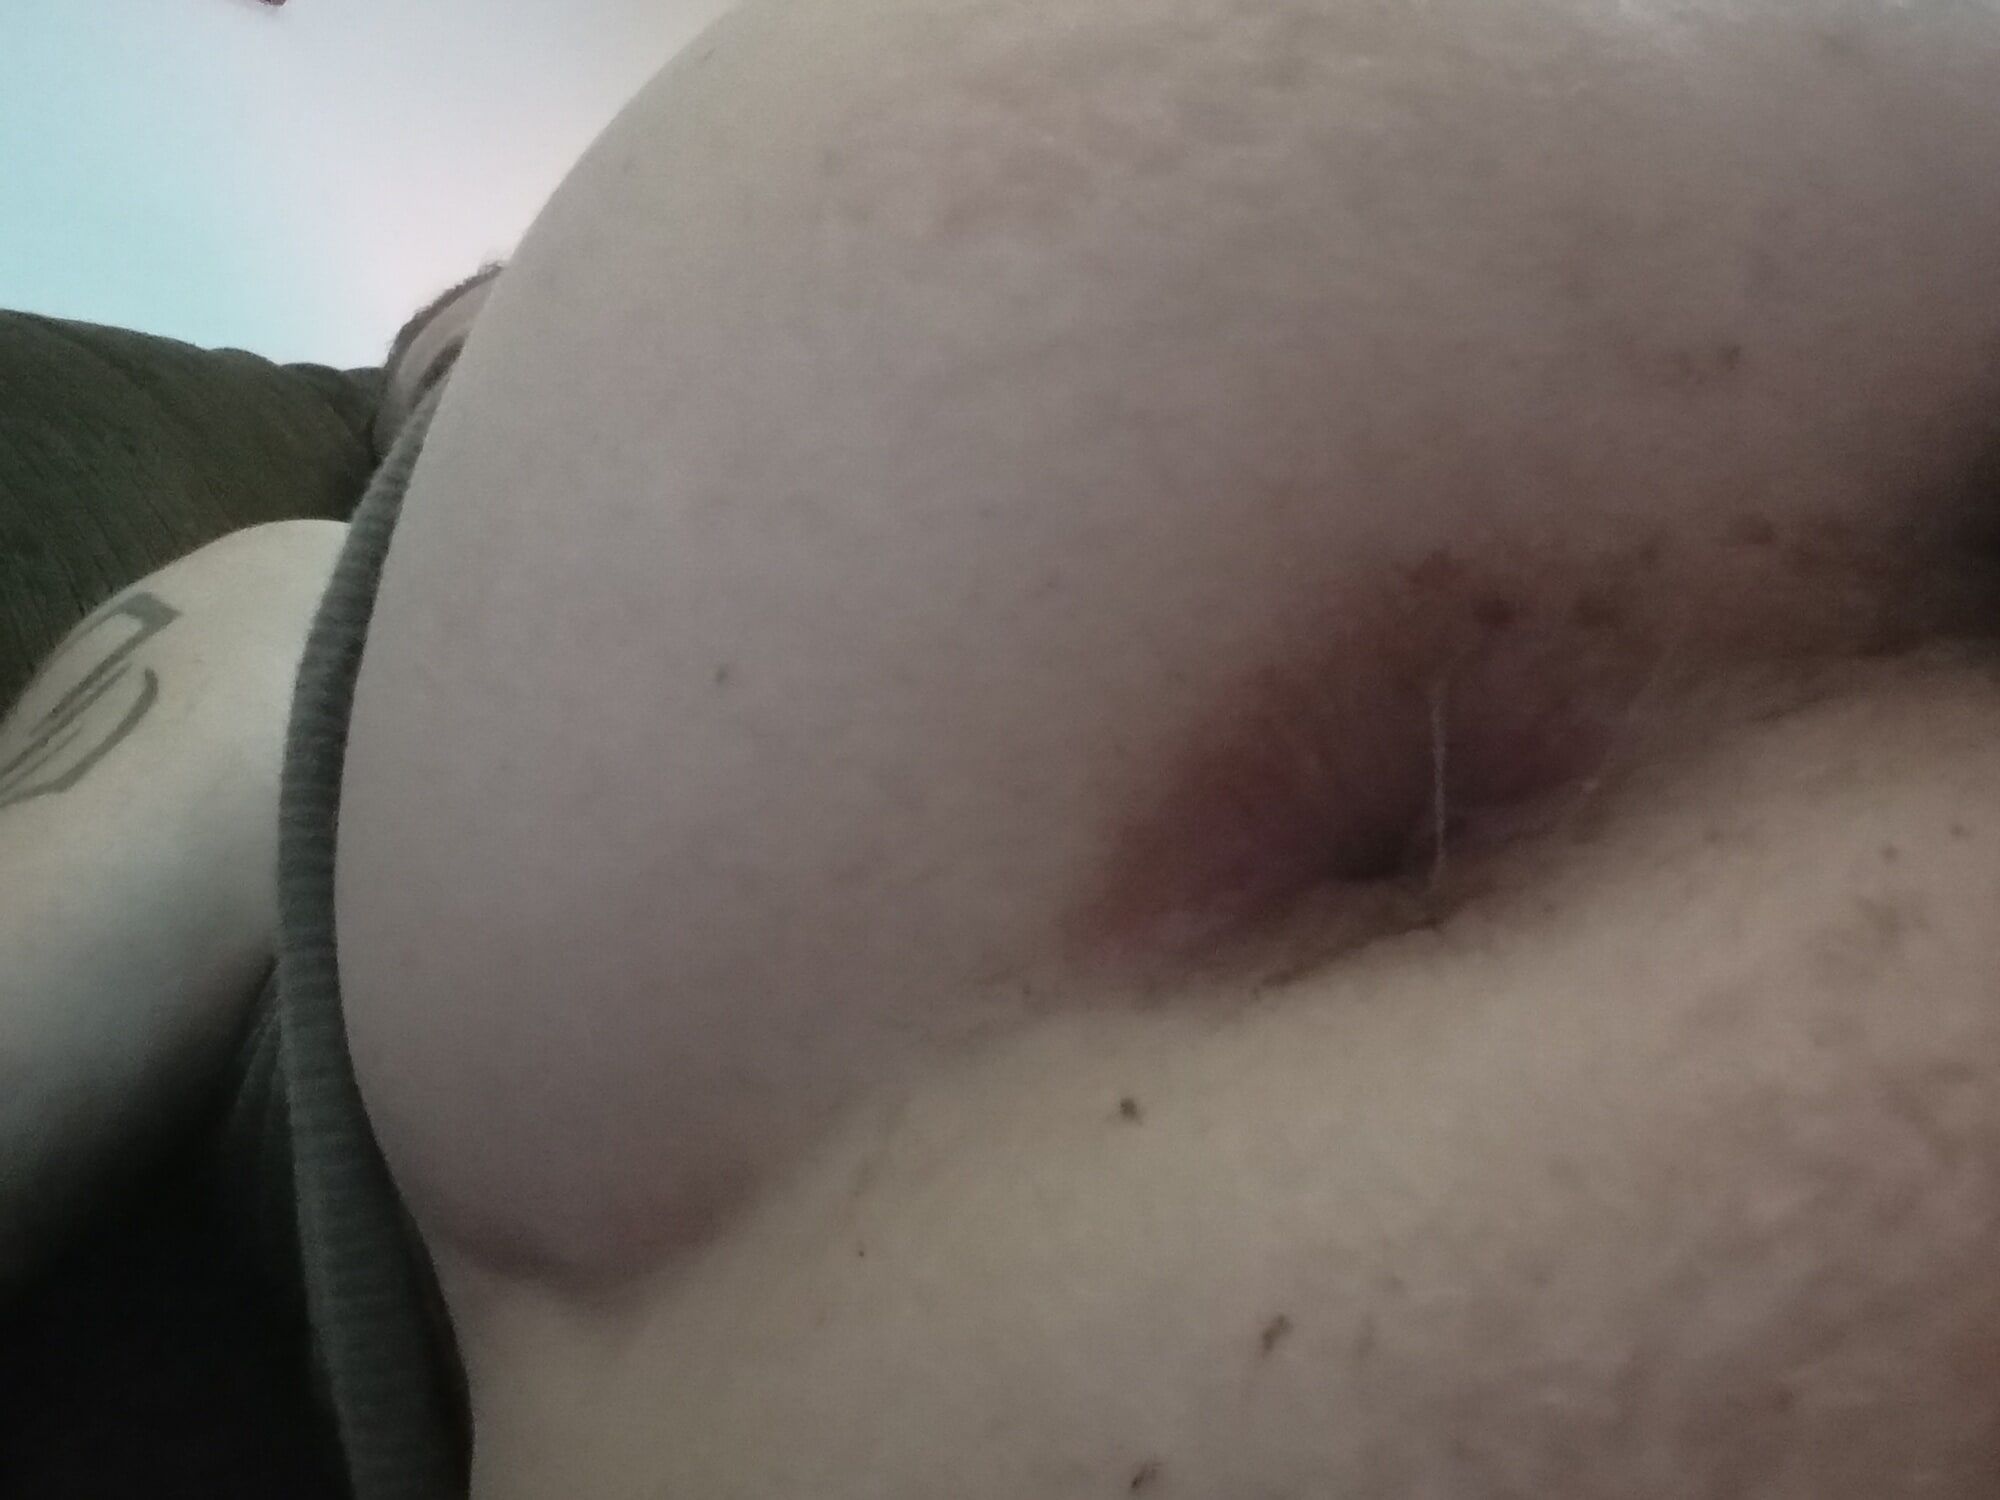 Would you like to put your tranny dick in my ass